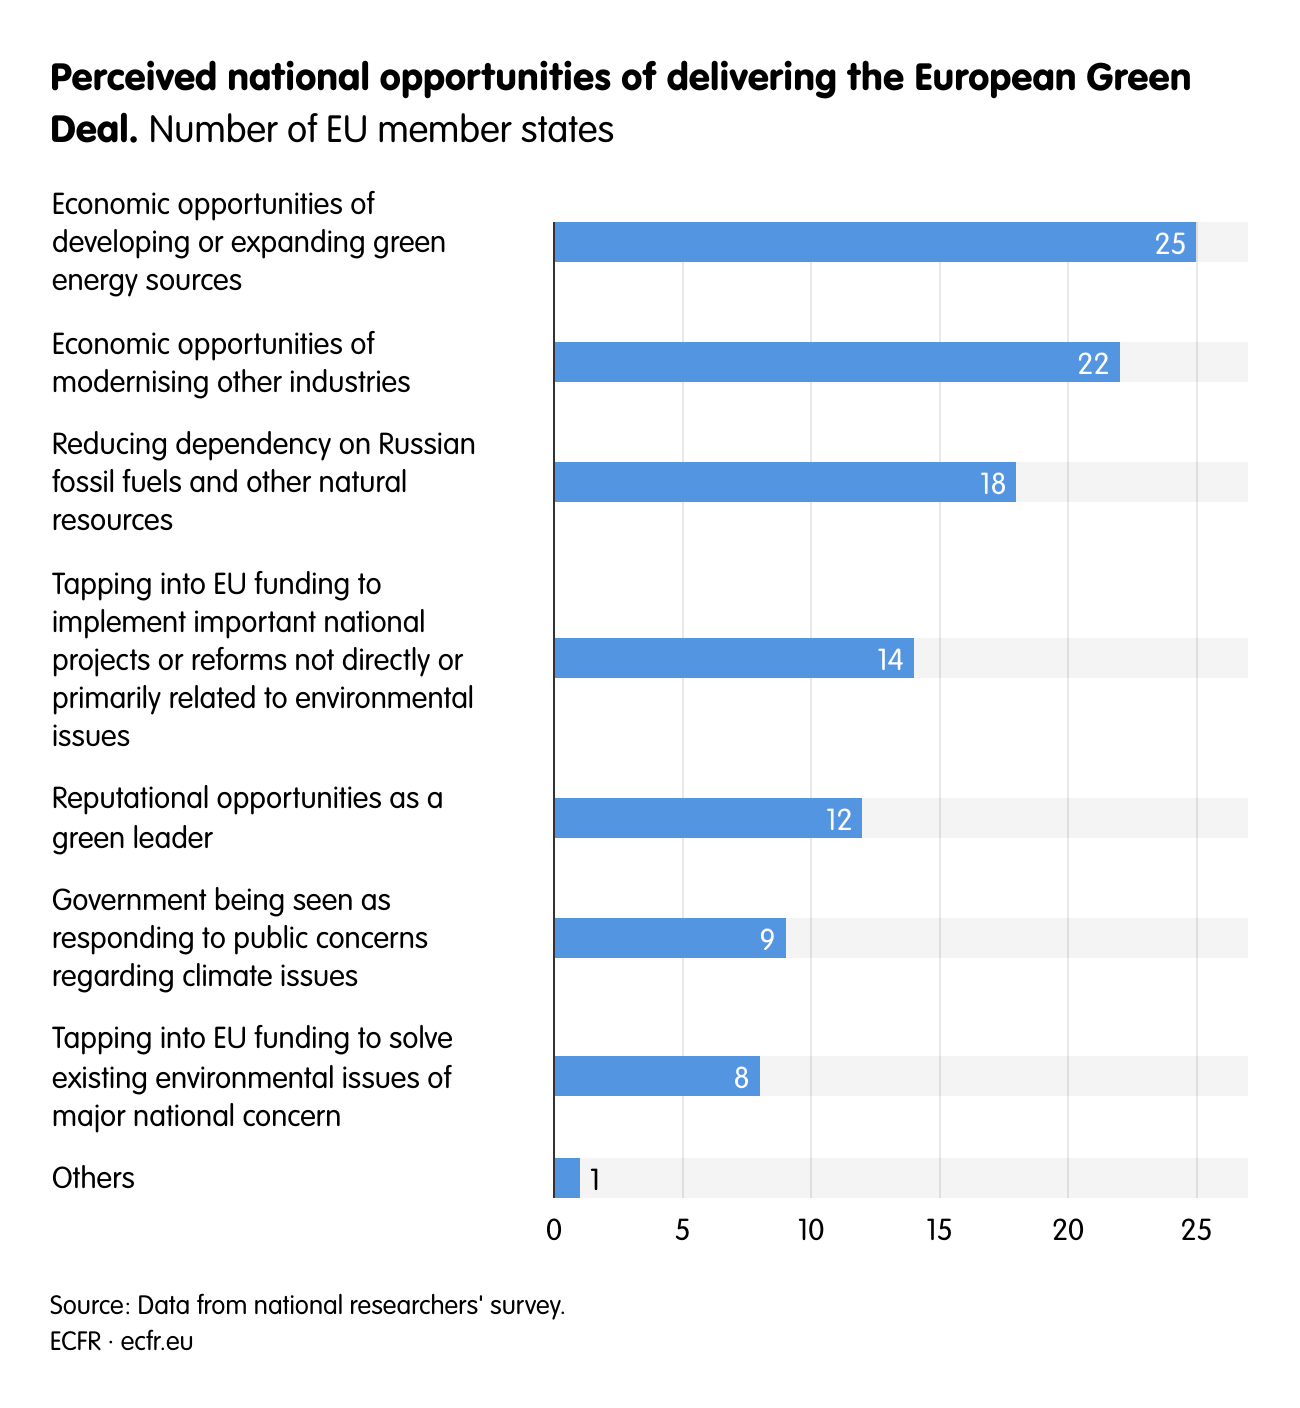 Perceived national opportunities of delivering the European Green Deal.